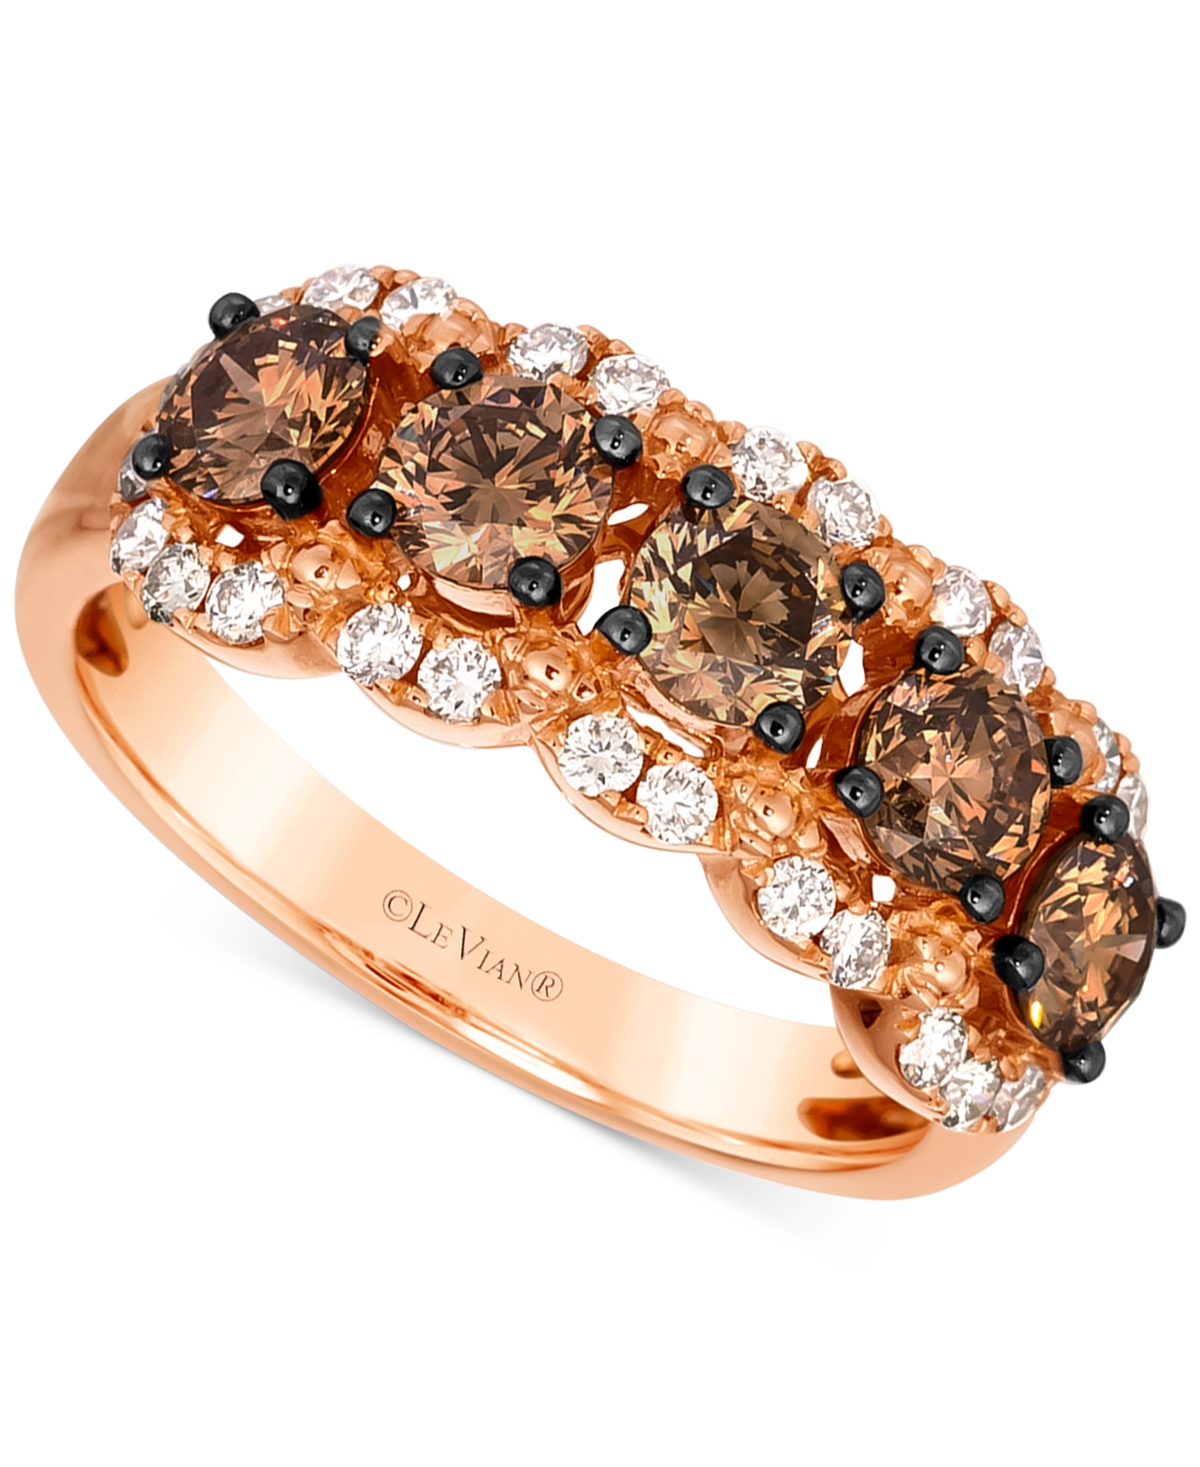 Le Vian Chocolate Diamond & Nude Diamond Three Row Ring (1-1/2 Ct. T.w.) In 14k Rose Gold In K Strawberry Gold Ring